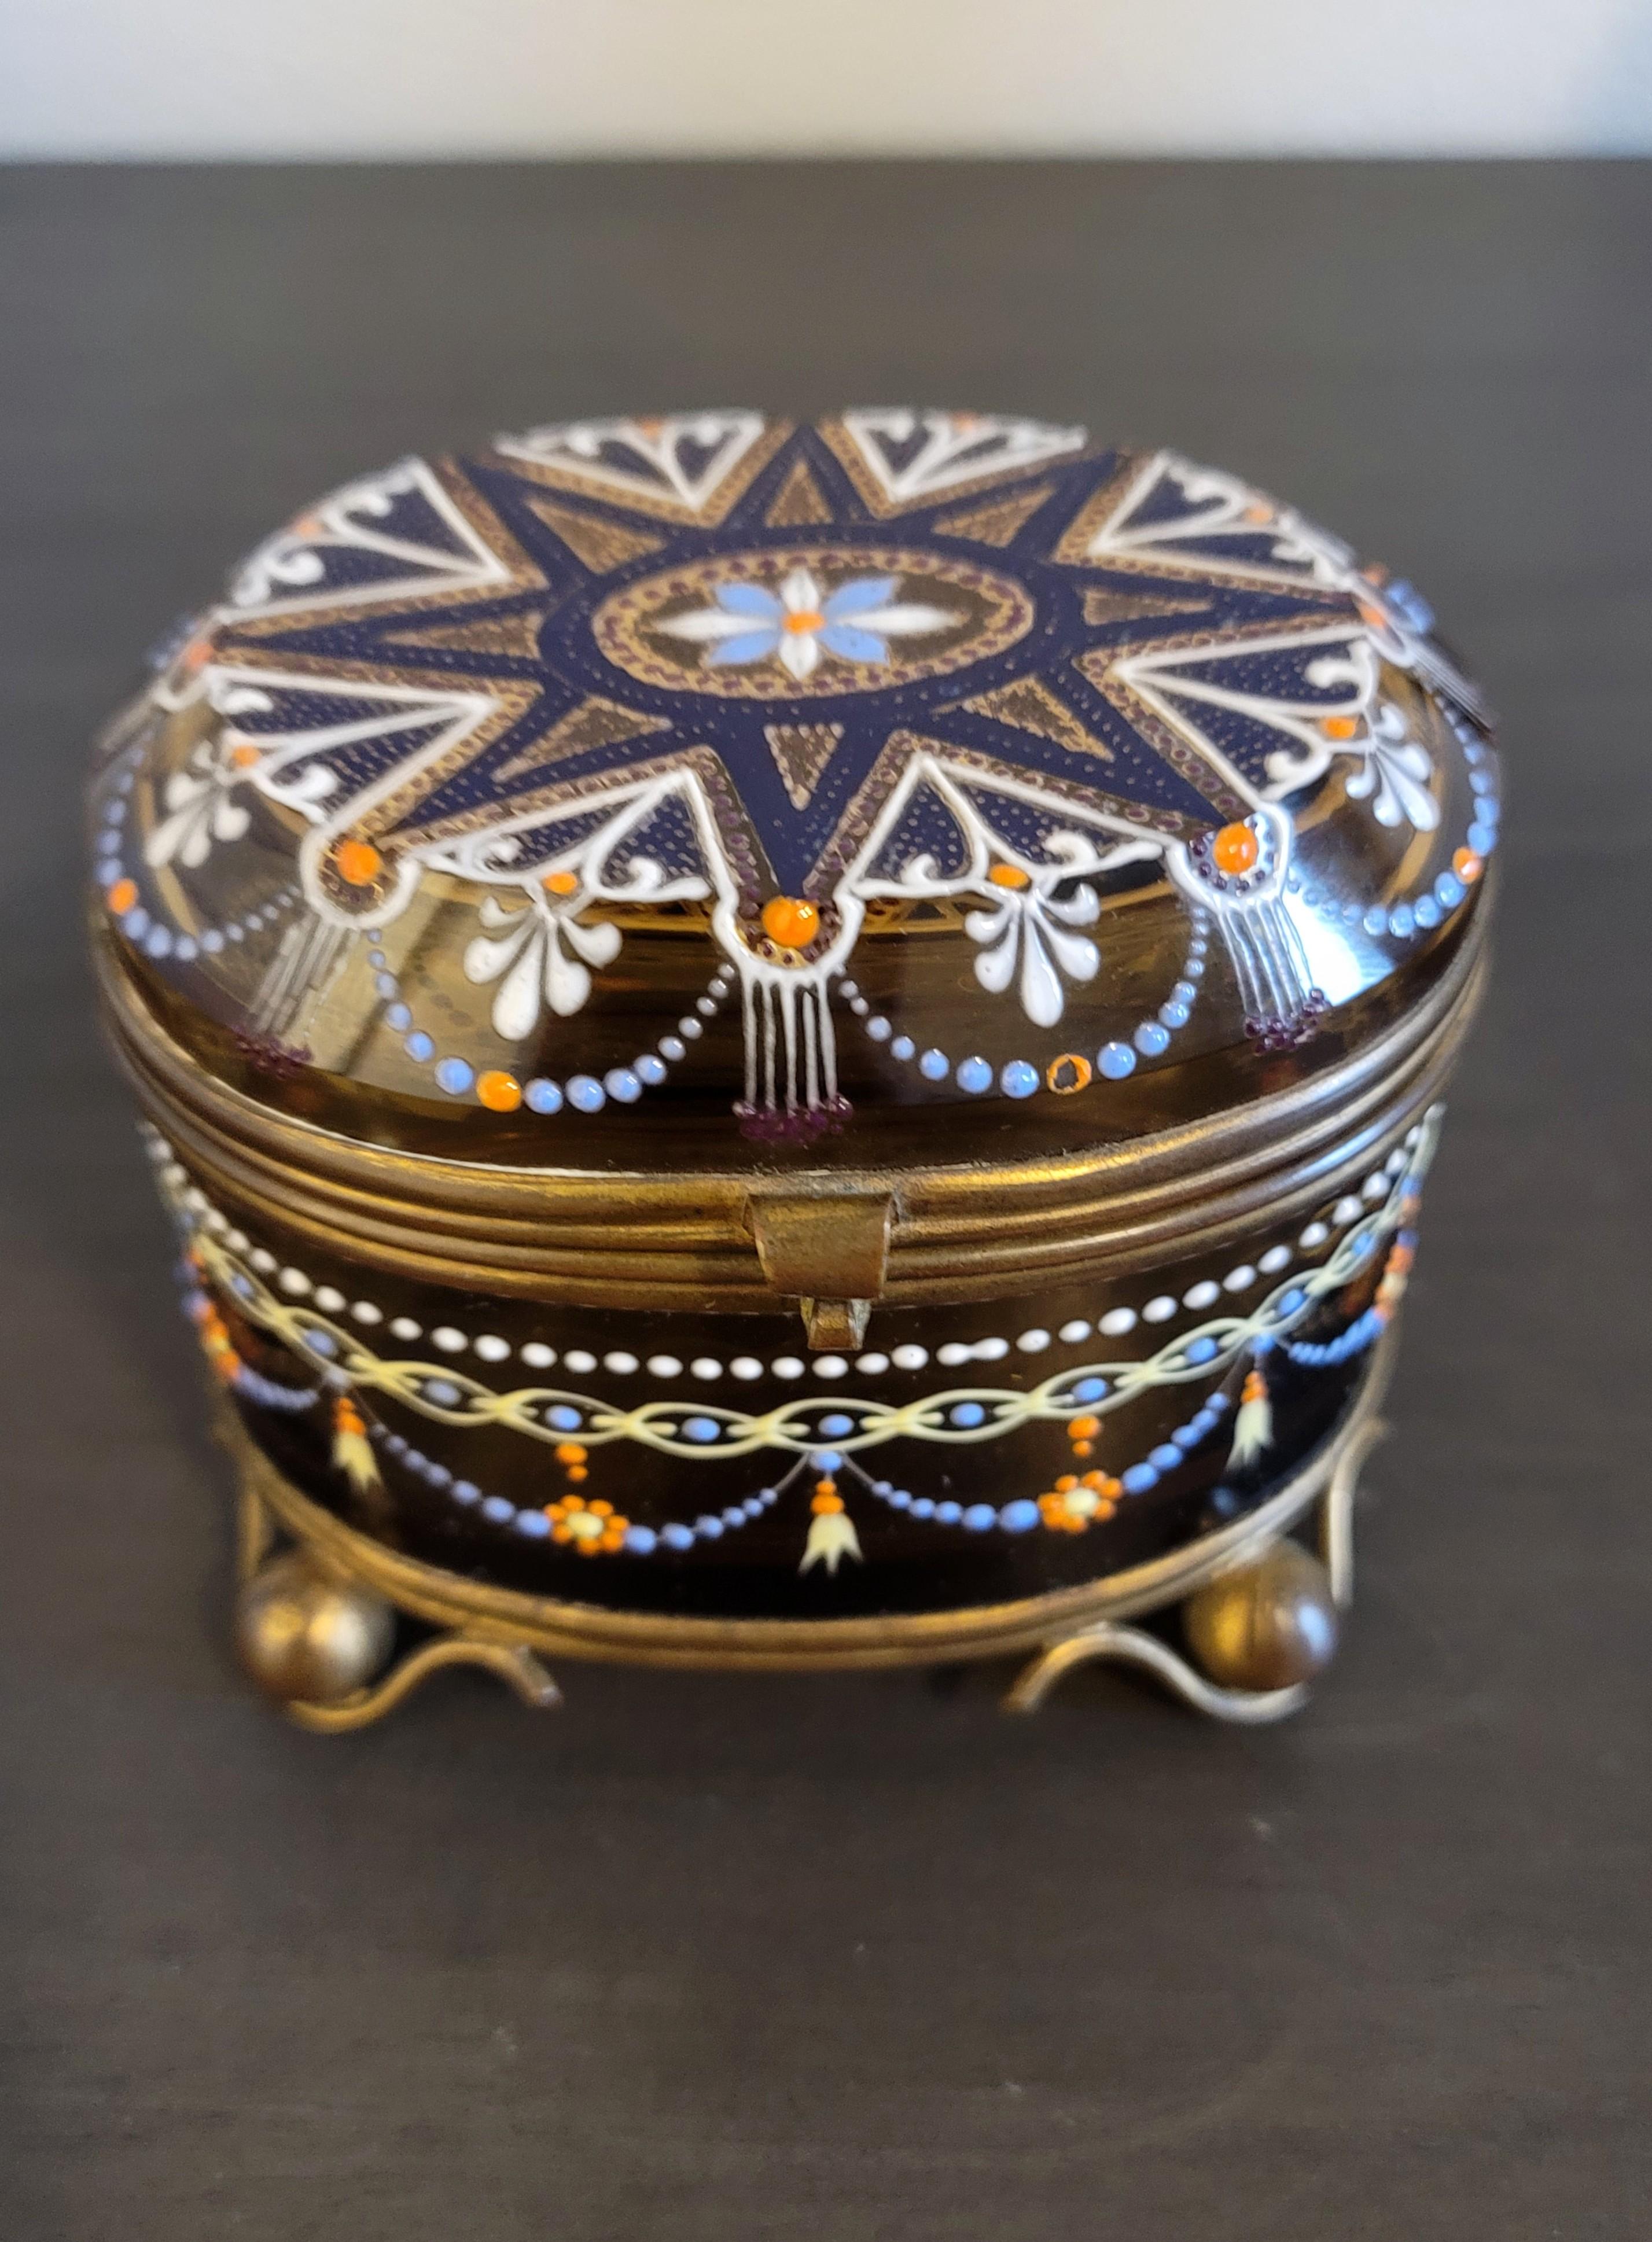 A stunning antique Bohemian enameled art glass hinged lid jewelry casket - table box by renowned luxury glass maker Moser.

Exquisitely hand-made in Bohemia (present day Czech Republic) in the late 19th century, artistic Art Nouveau period